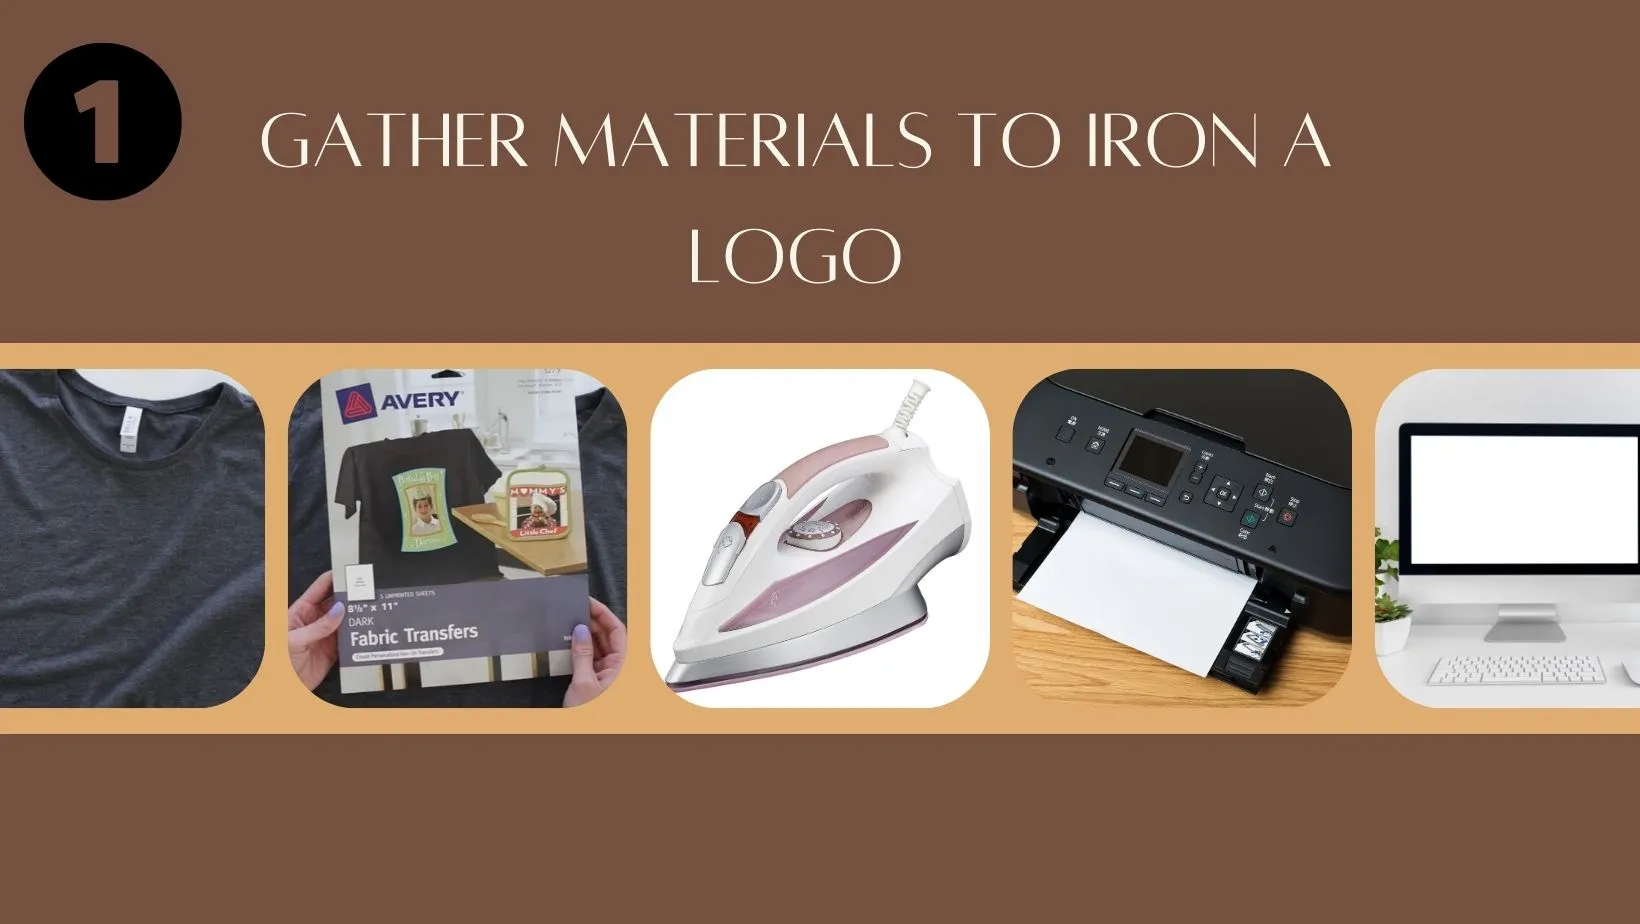 HOW TO IRON A LOGO? – 10 EASY STEPS FOR DIY IRON-ON TRANSFER